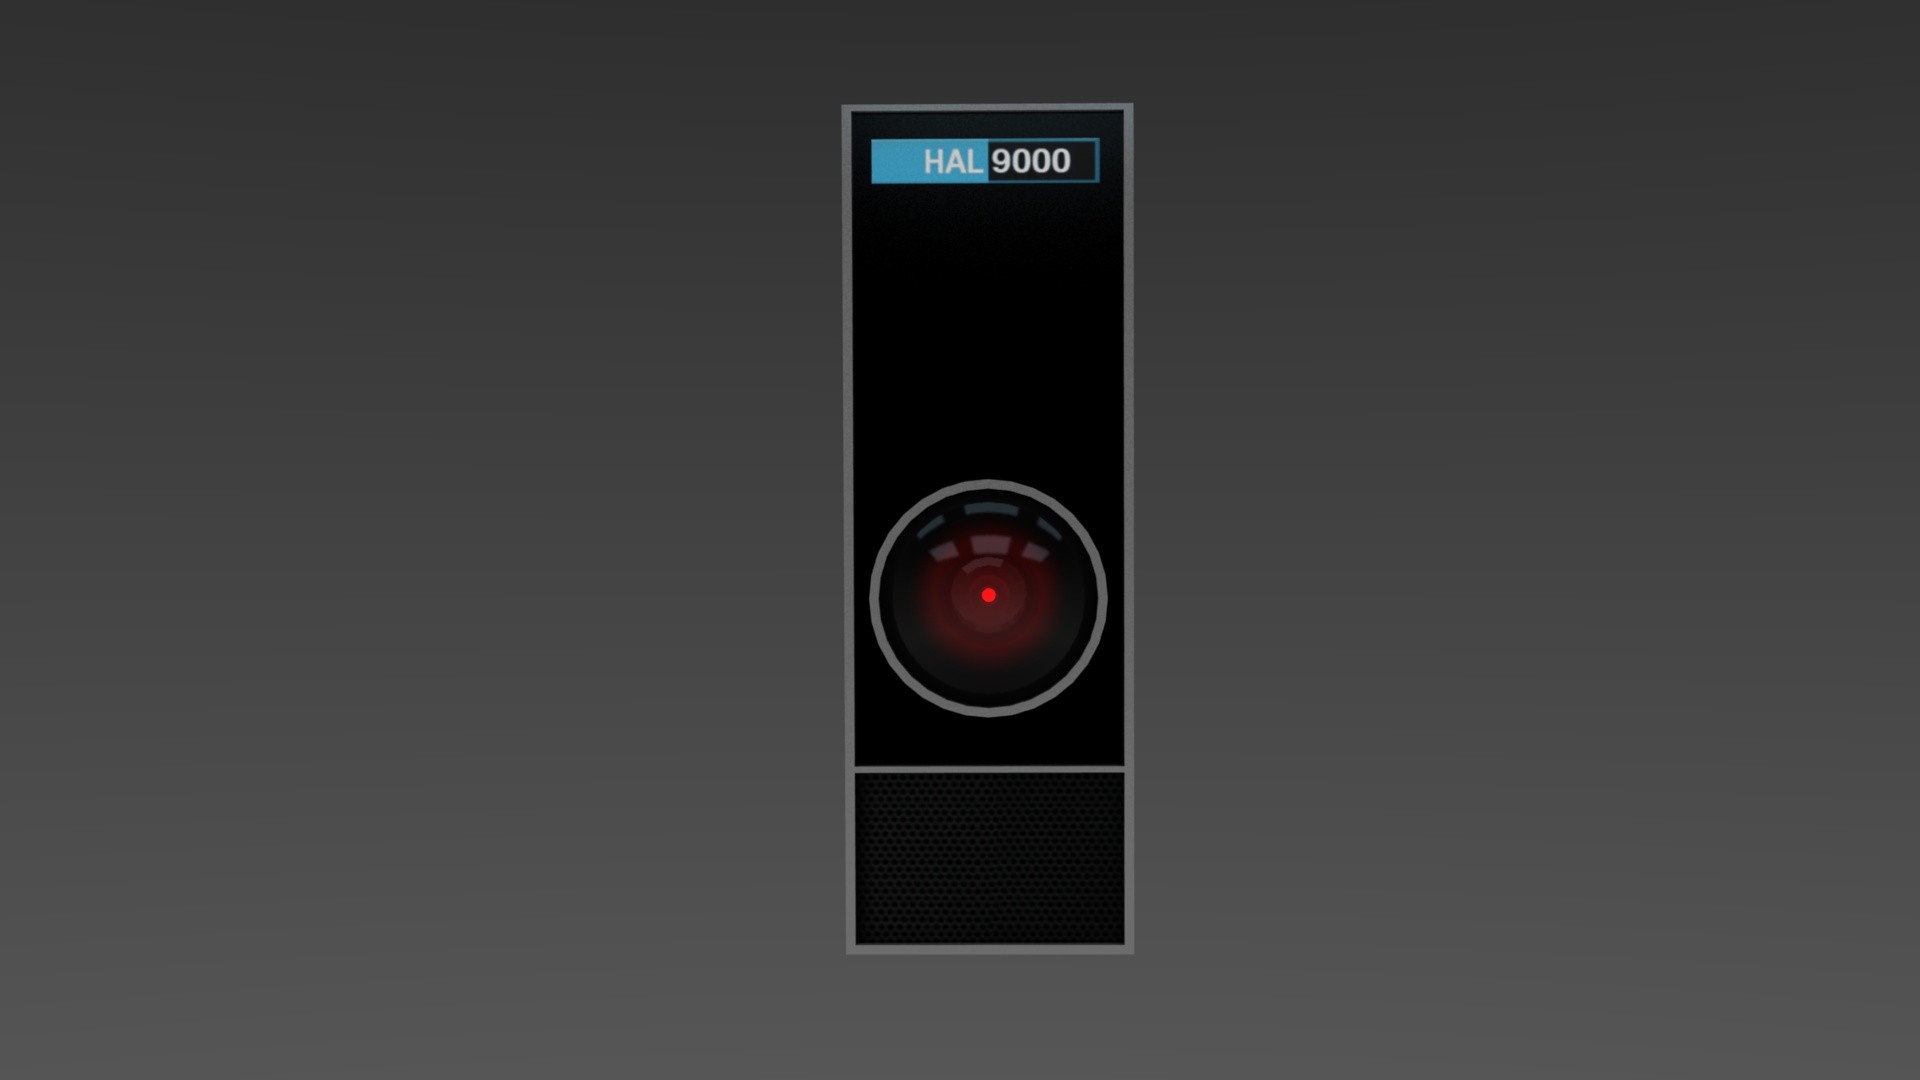 1920x1080 ... HAL 9000 by Avenger-210